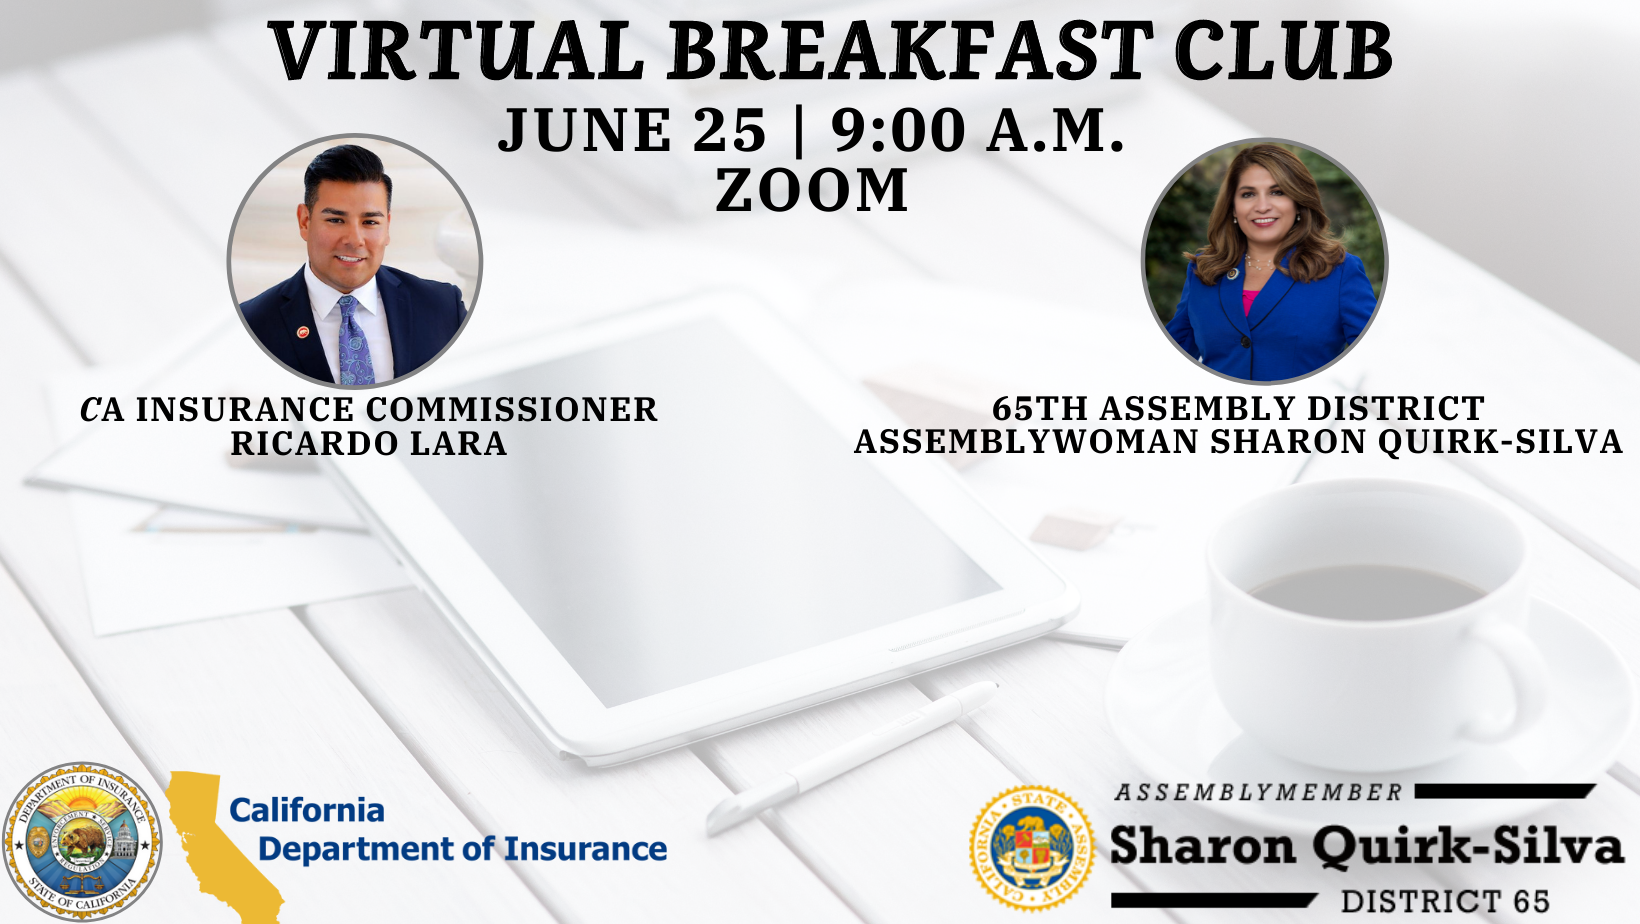 Assemblywoman Quirk-Silva Virtual Breakfast Club will be on June 25 at 9 a.m. with Ricardo Lara